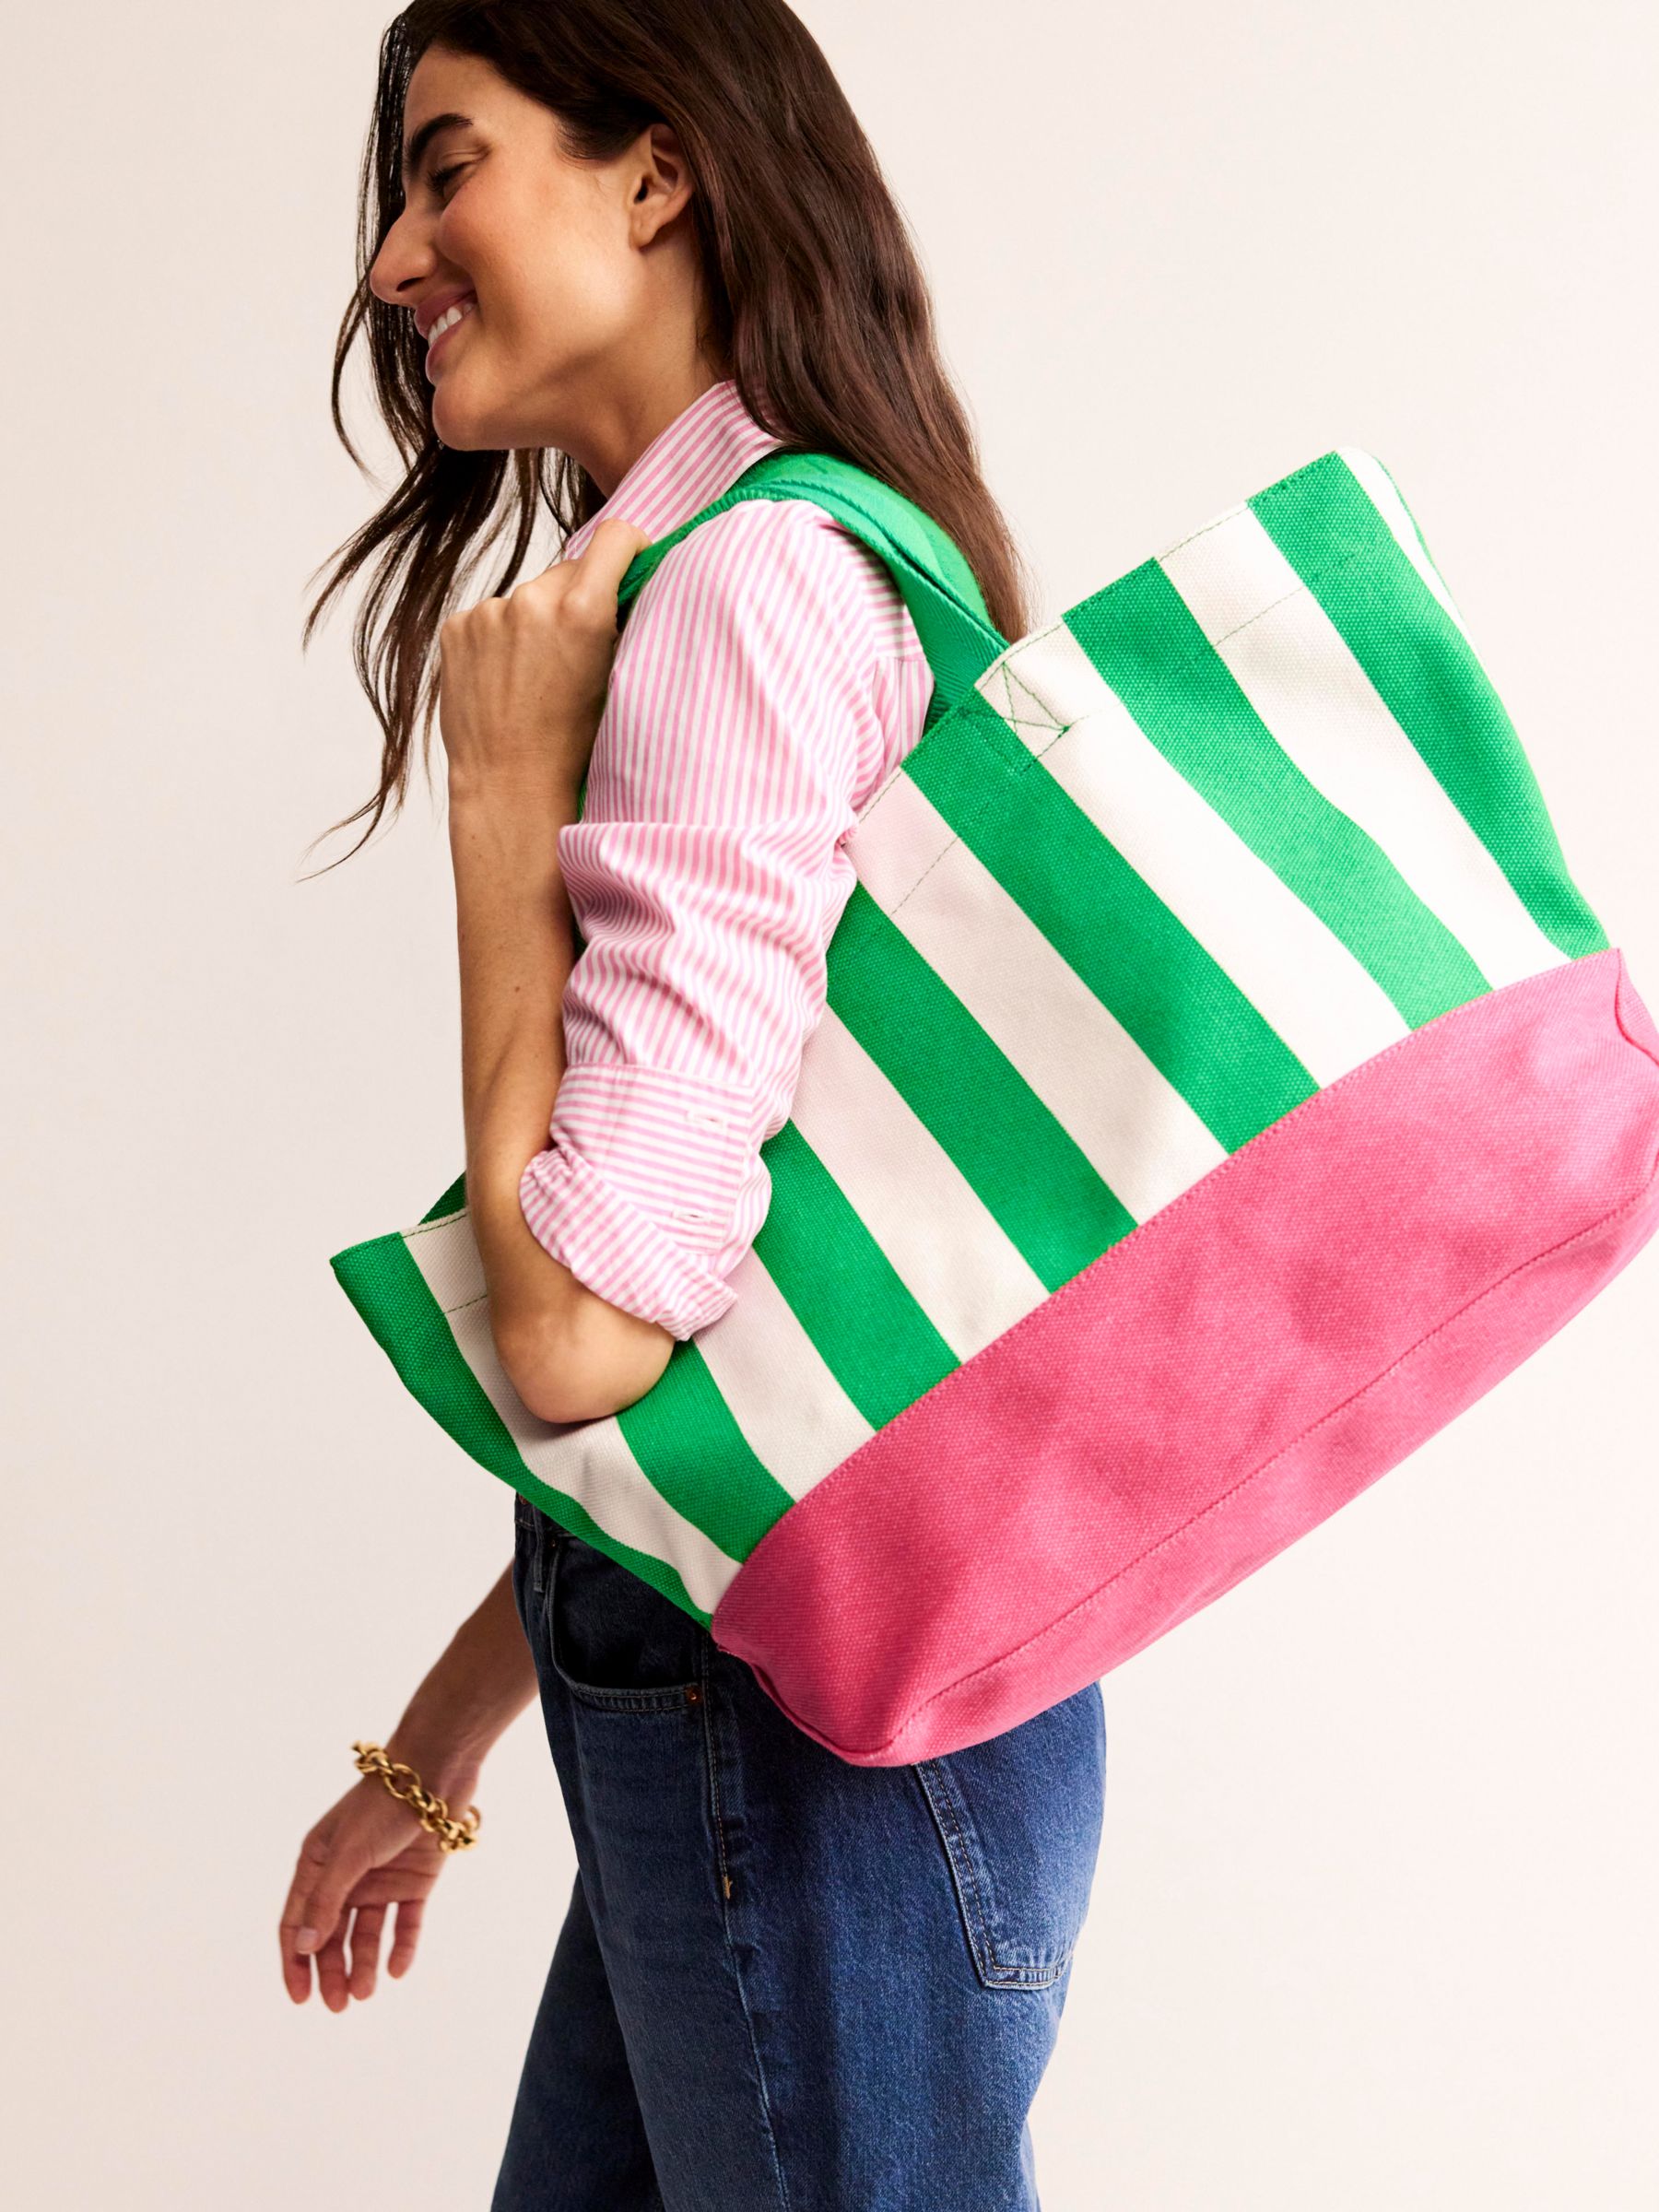 Boden Relaxed Canvas Stripe Tote Bag, Green/White/Pink, One Size